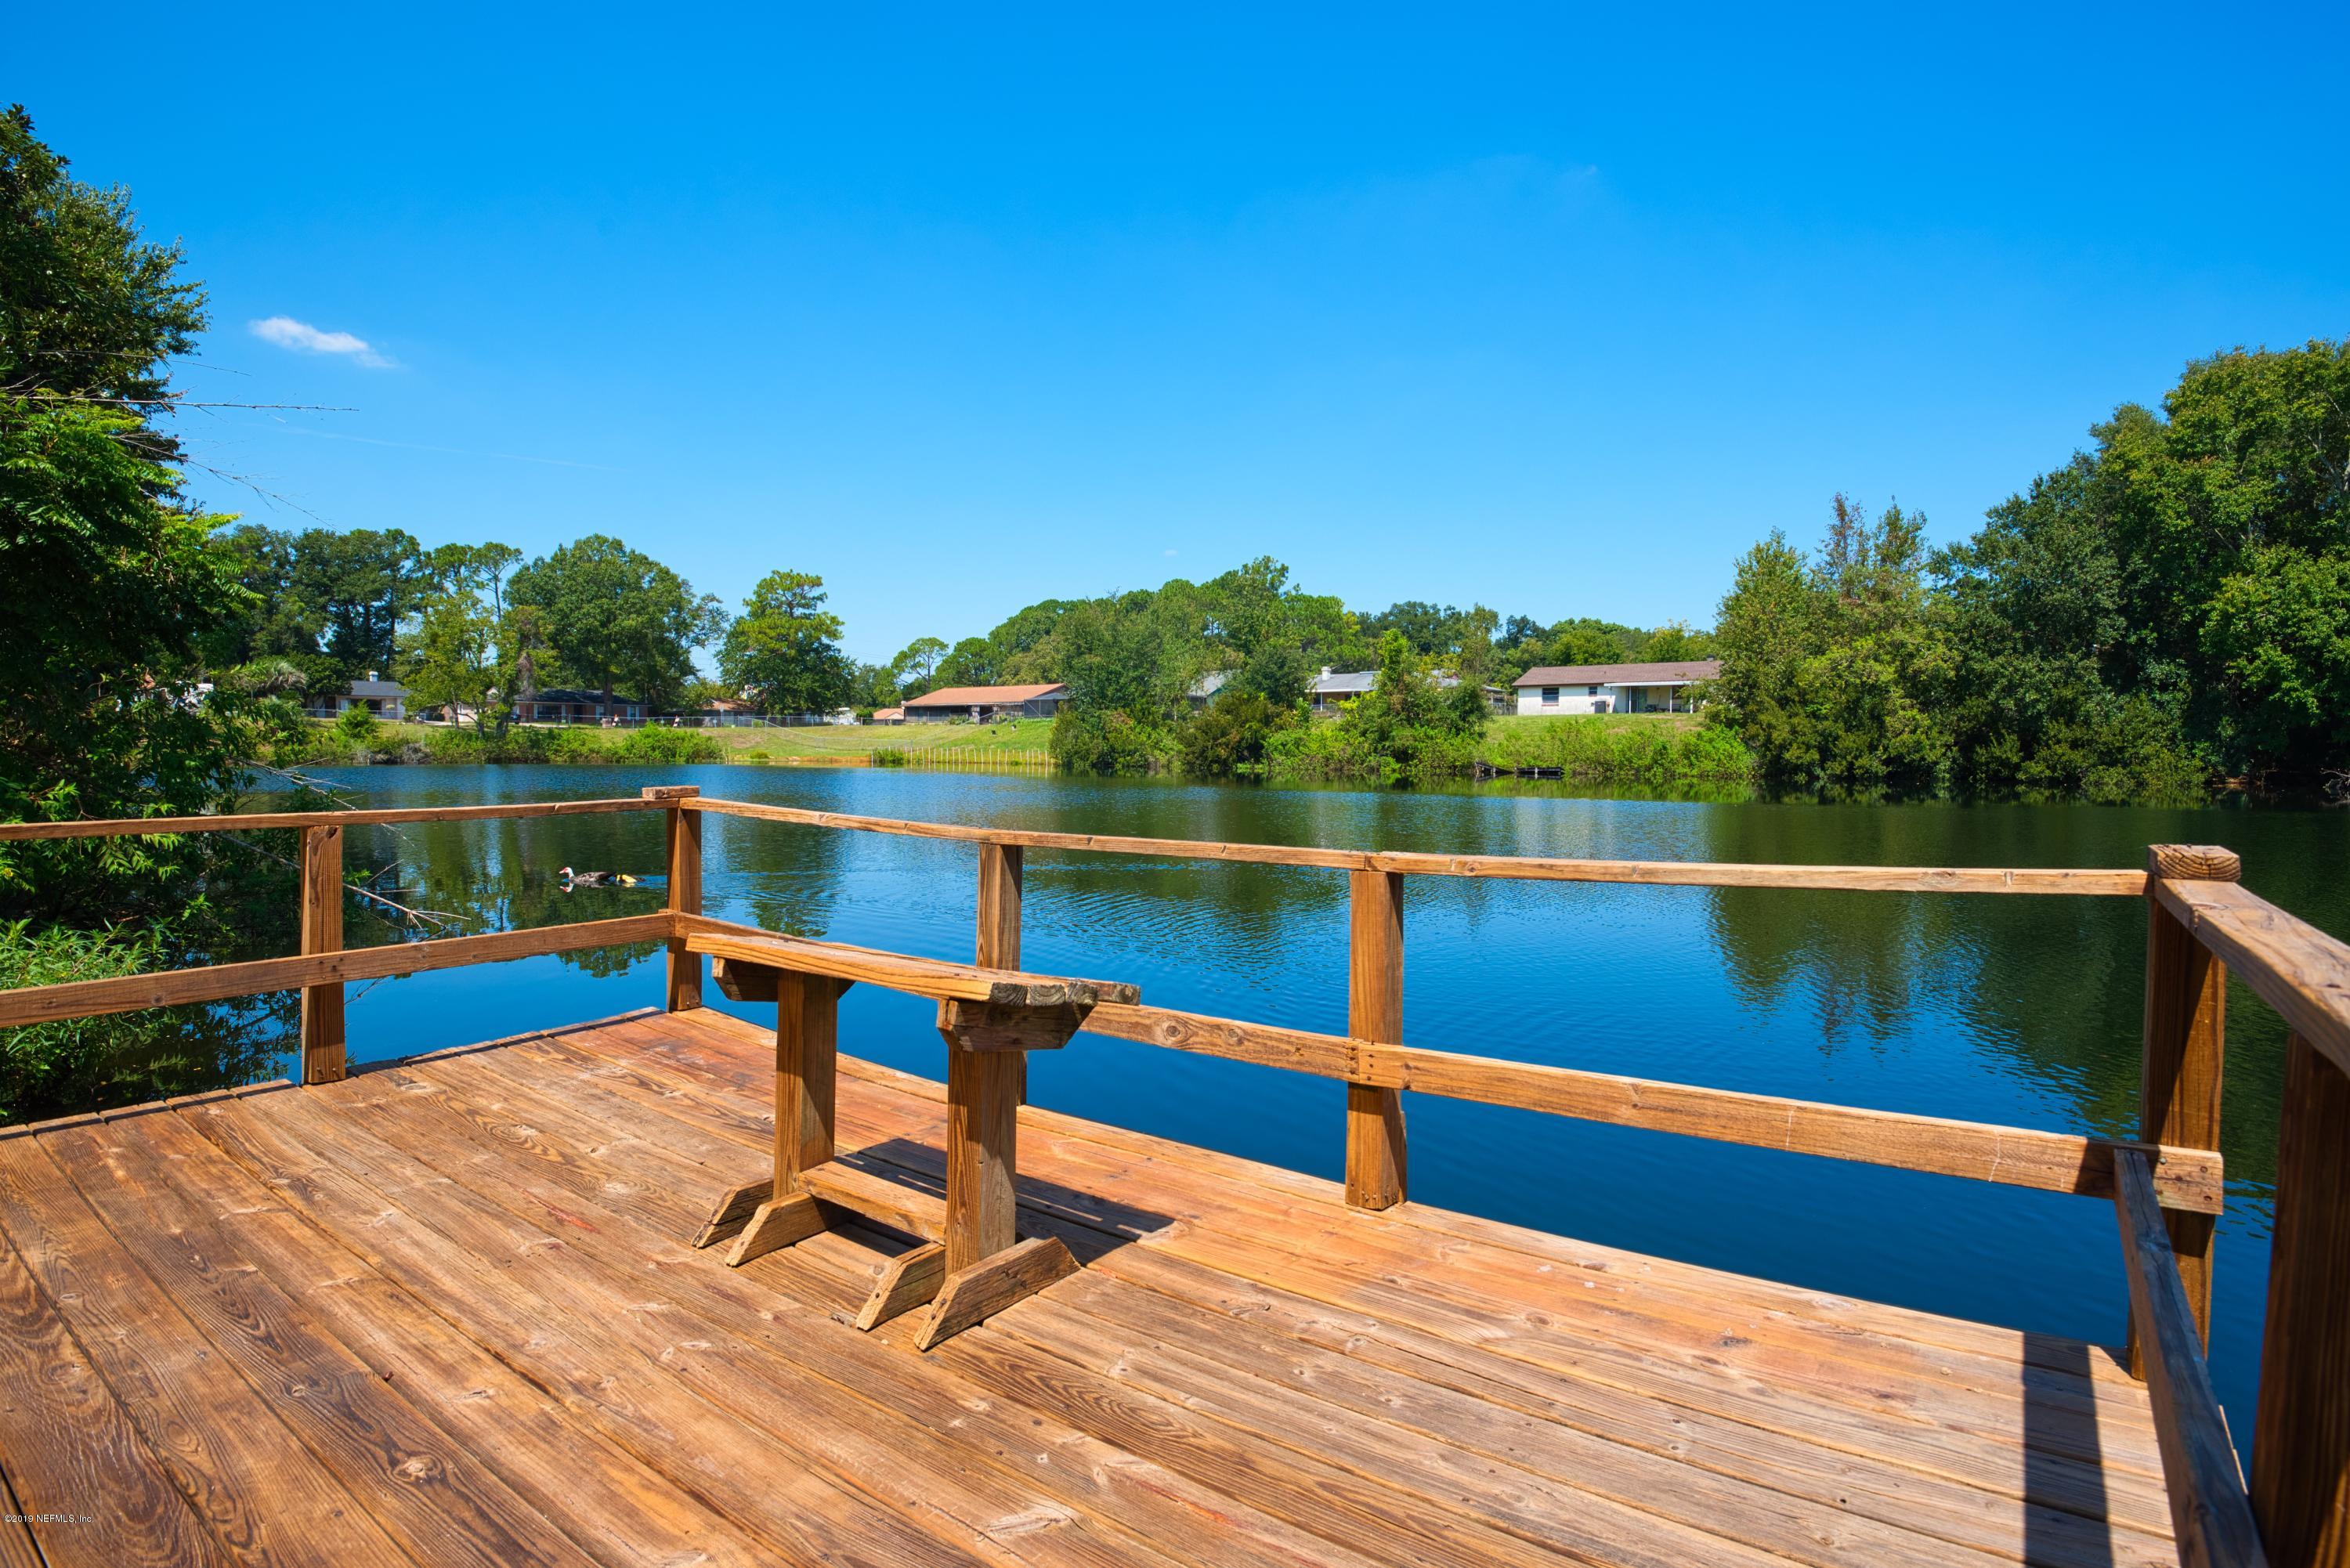 a view of wooden deck and a lake view